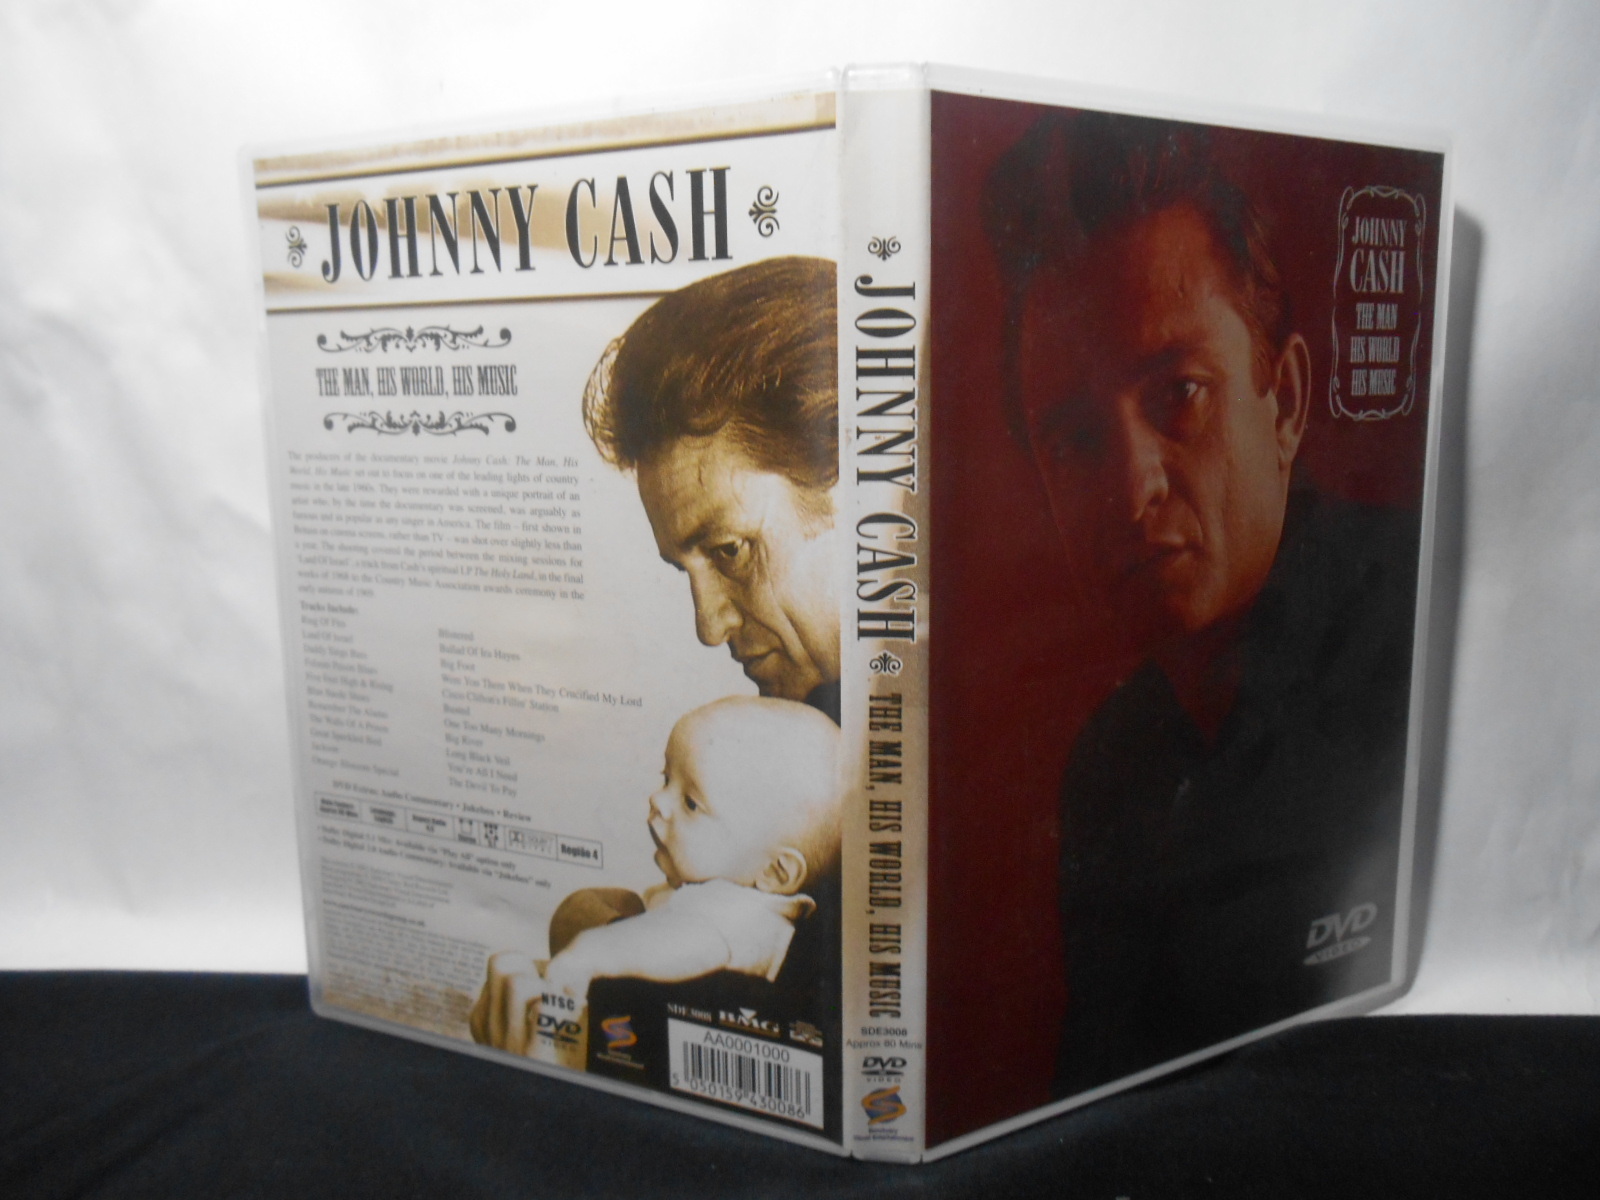 DVD - Johnny Cash - The Man his World his Music